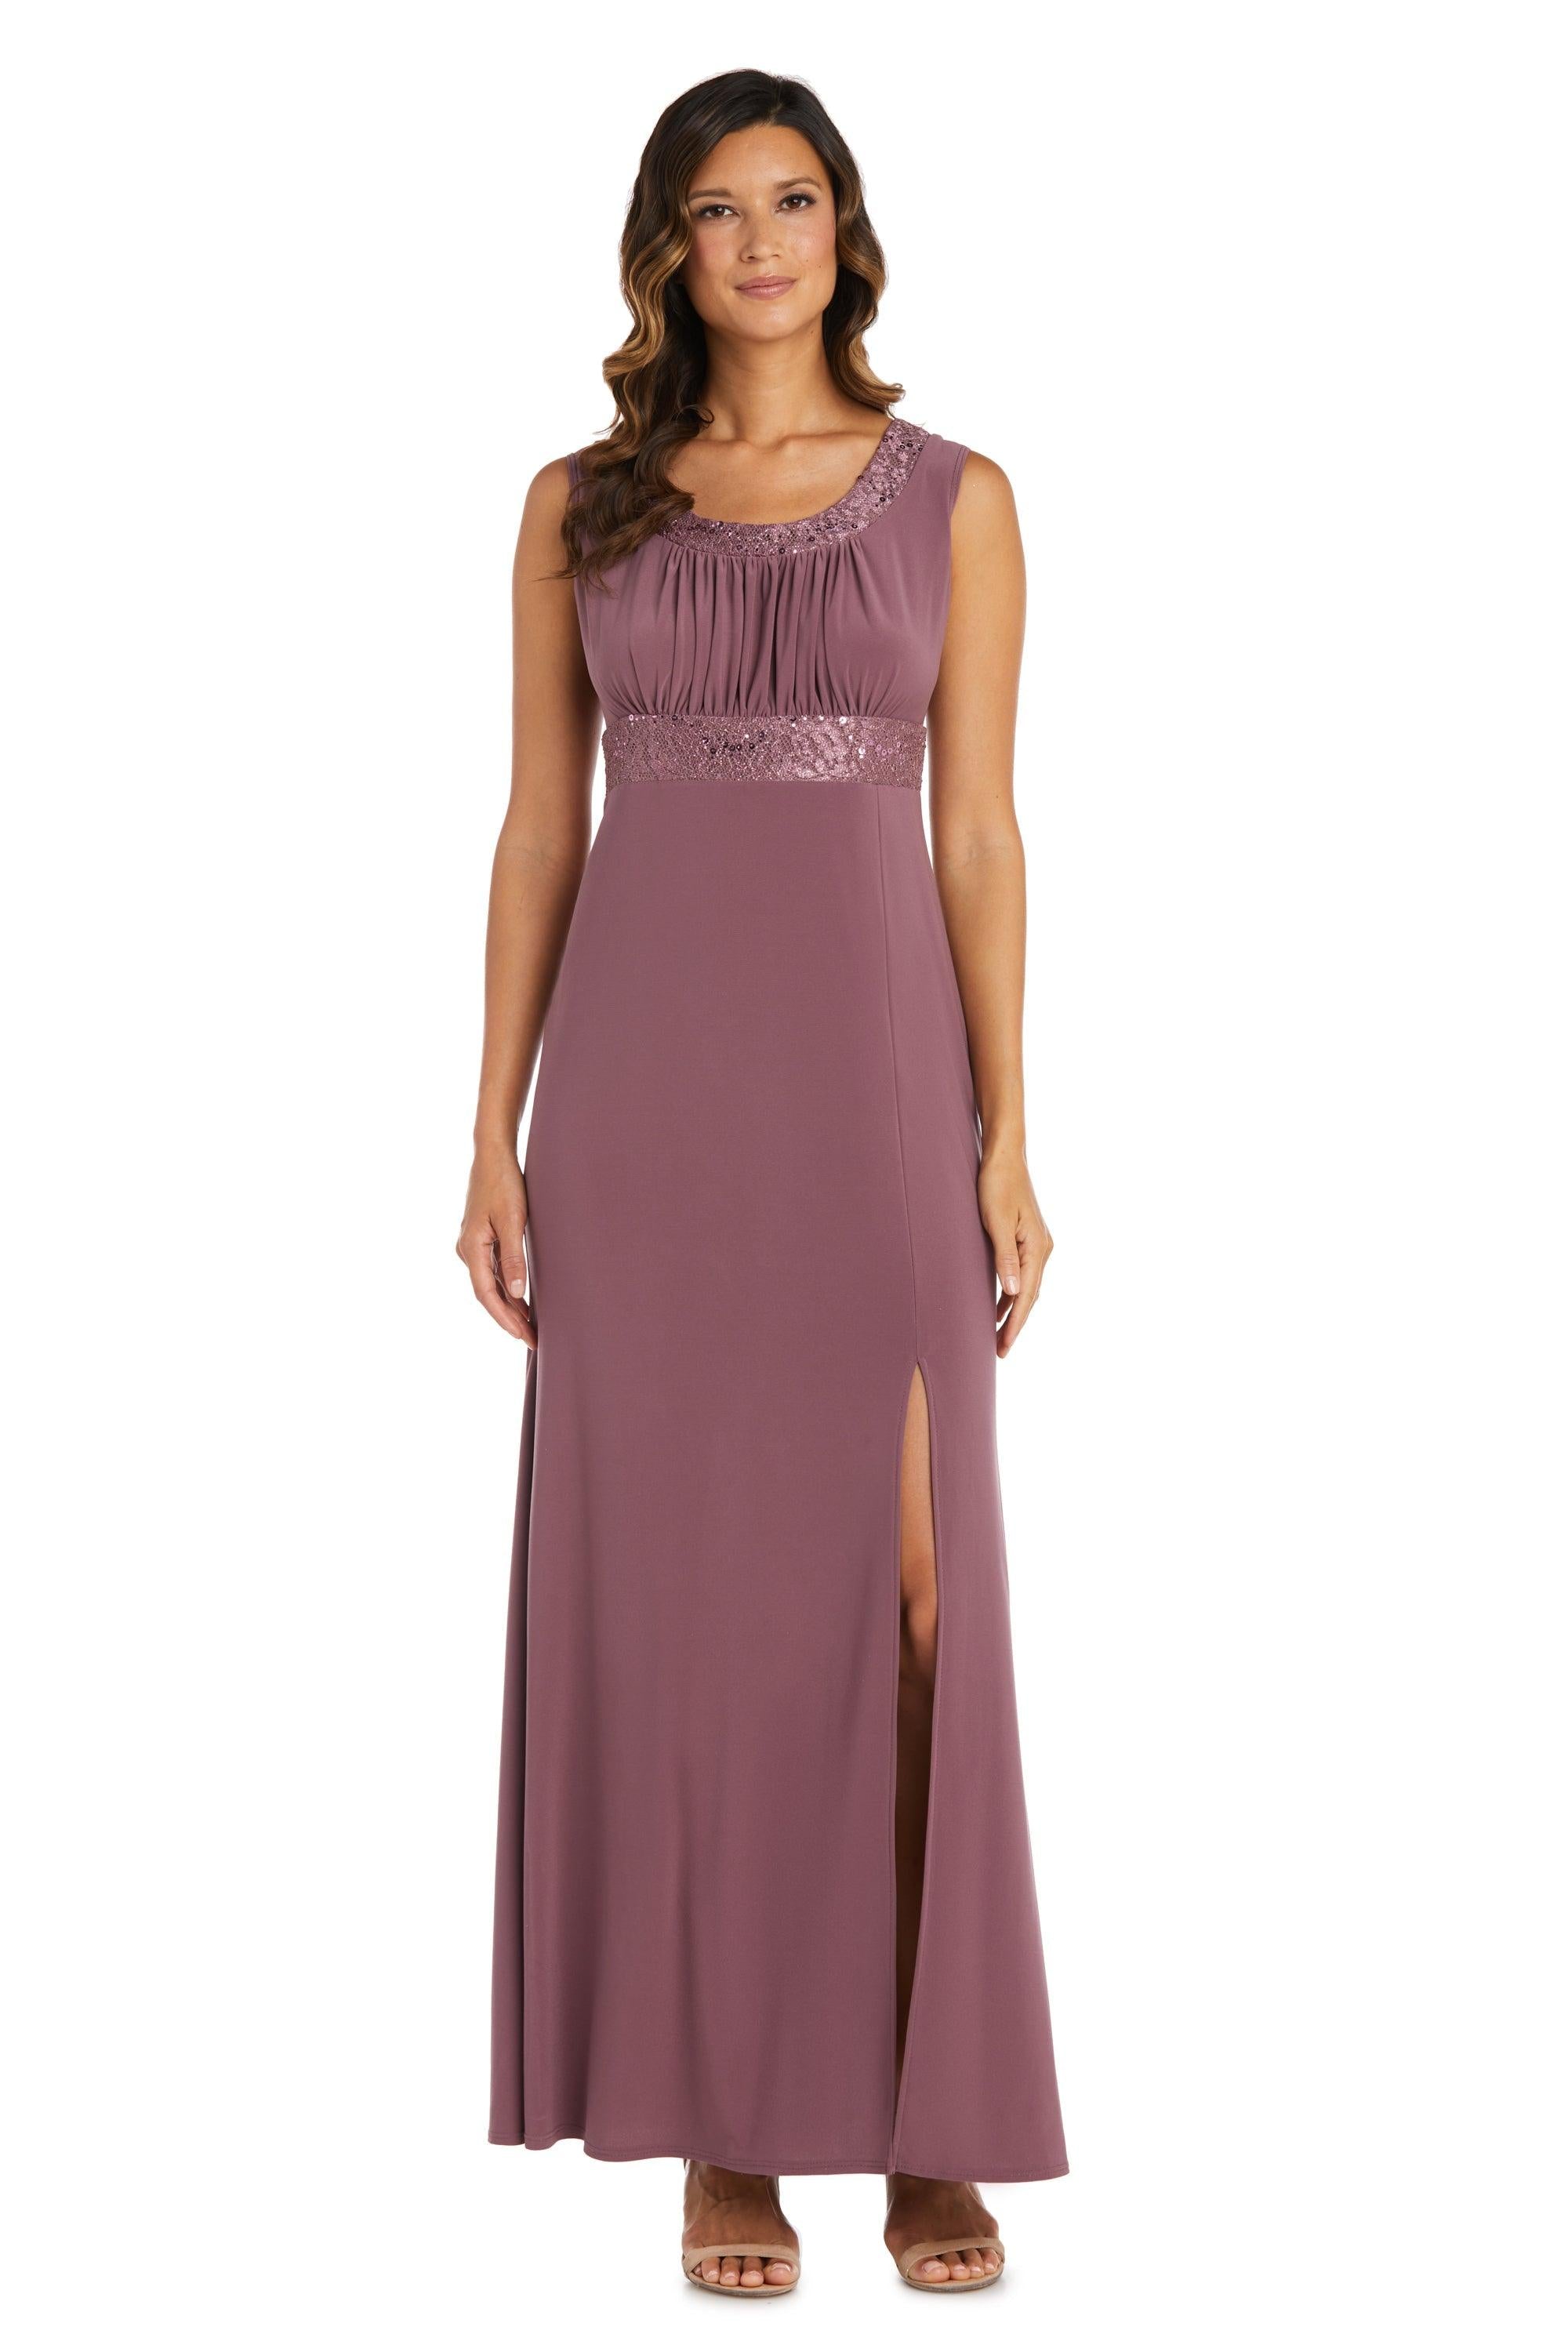 R&M Richards Long Mother of the Bride Dress 3785 - The Dress Outlet